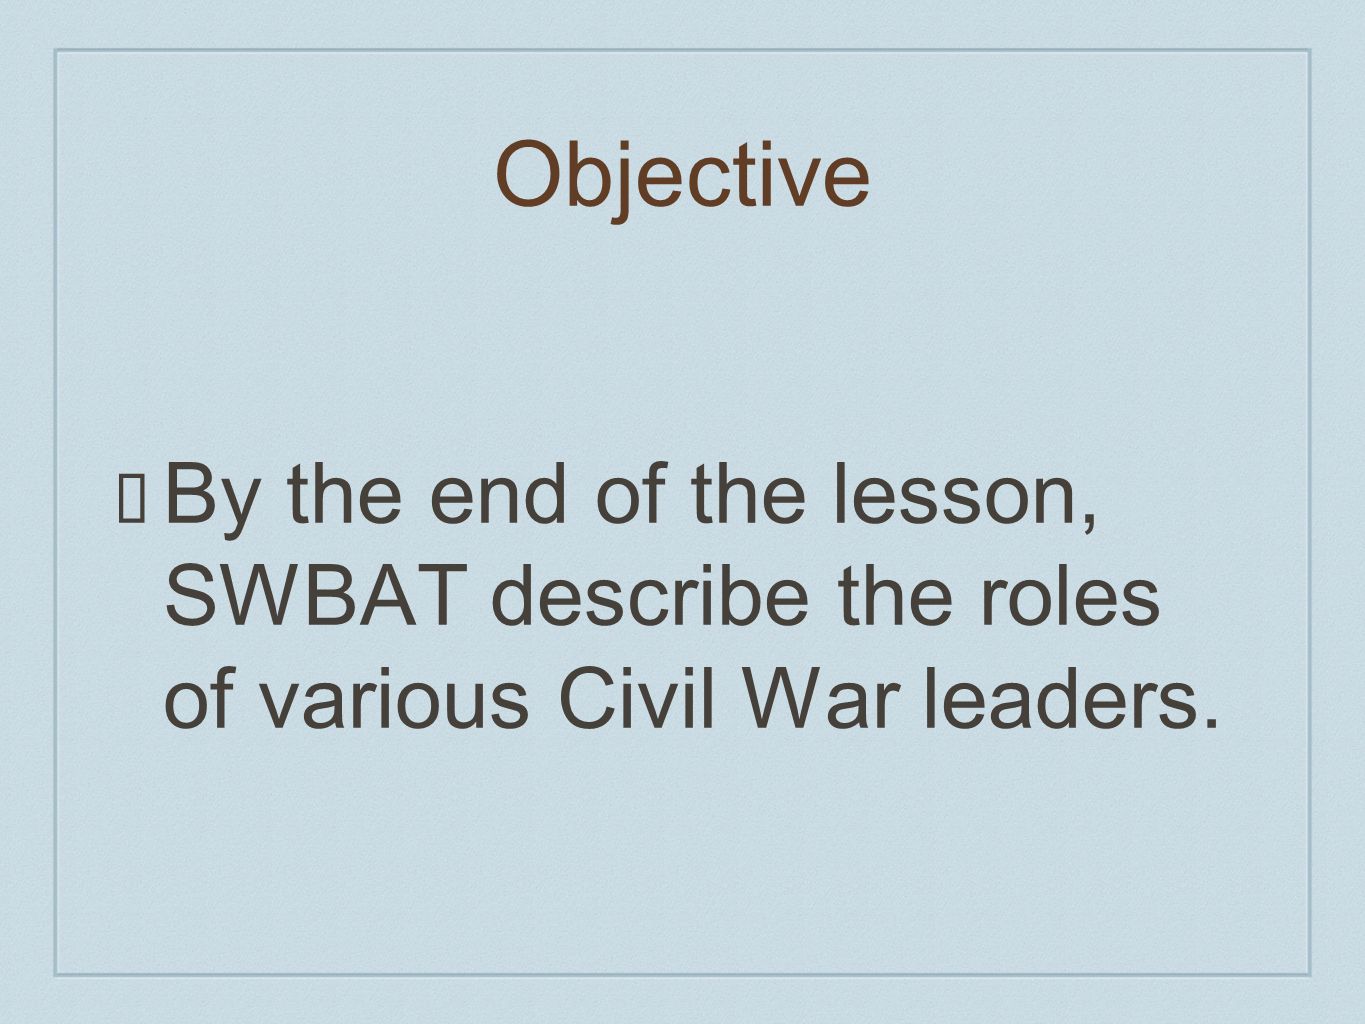 Objective By the end of the lesson, SWBAT describe the roles of various Civil War leaders.